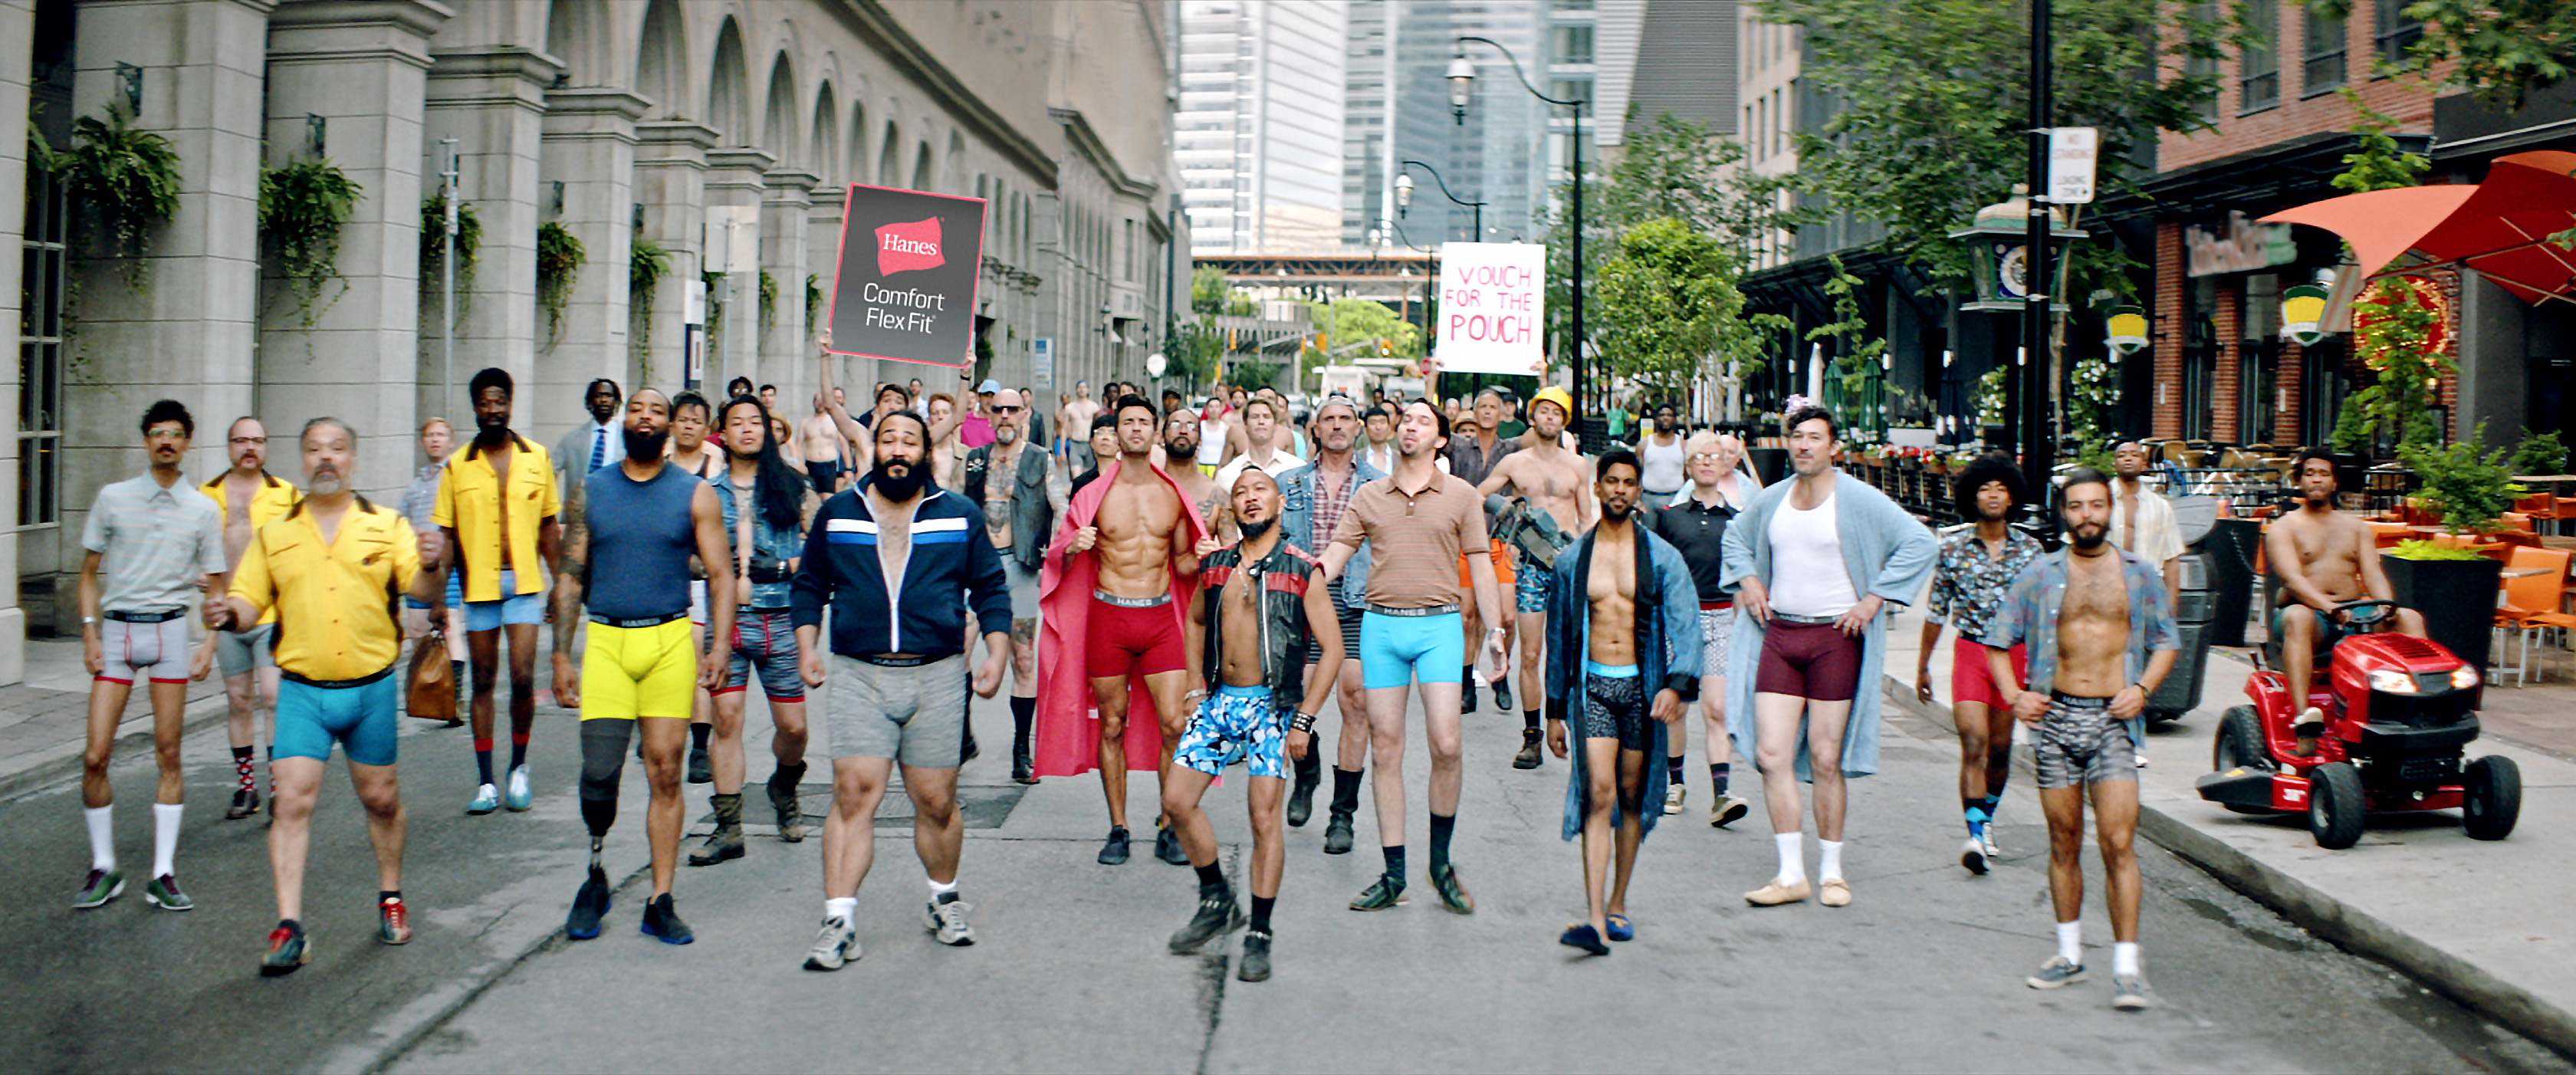 Hanes Encourages Men To Love The Skin They're In With New 'Every Bod'  Campaign